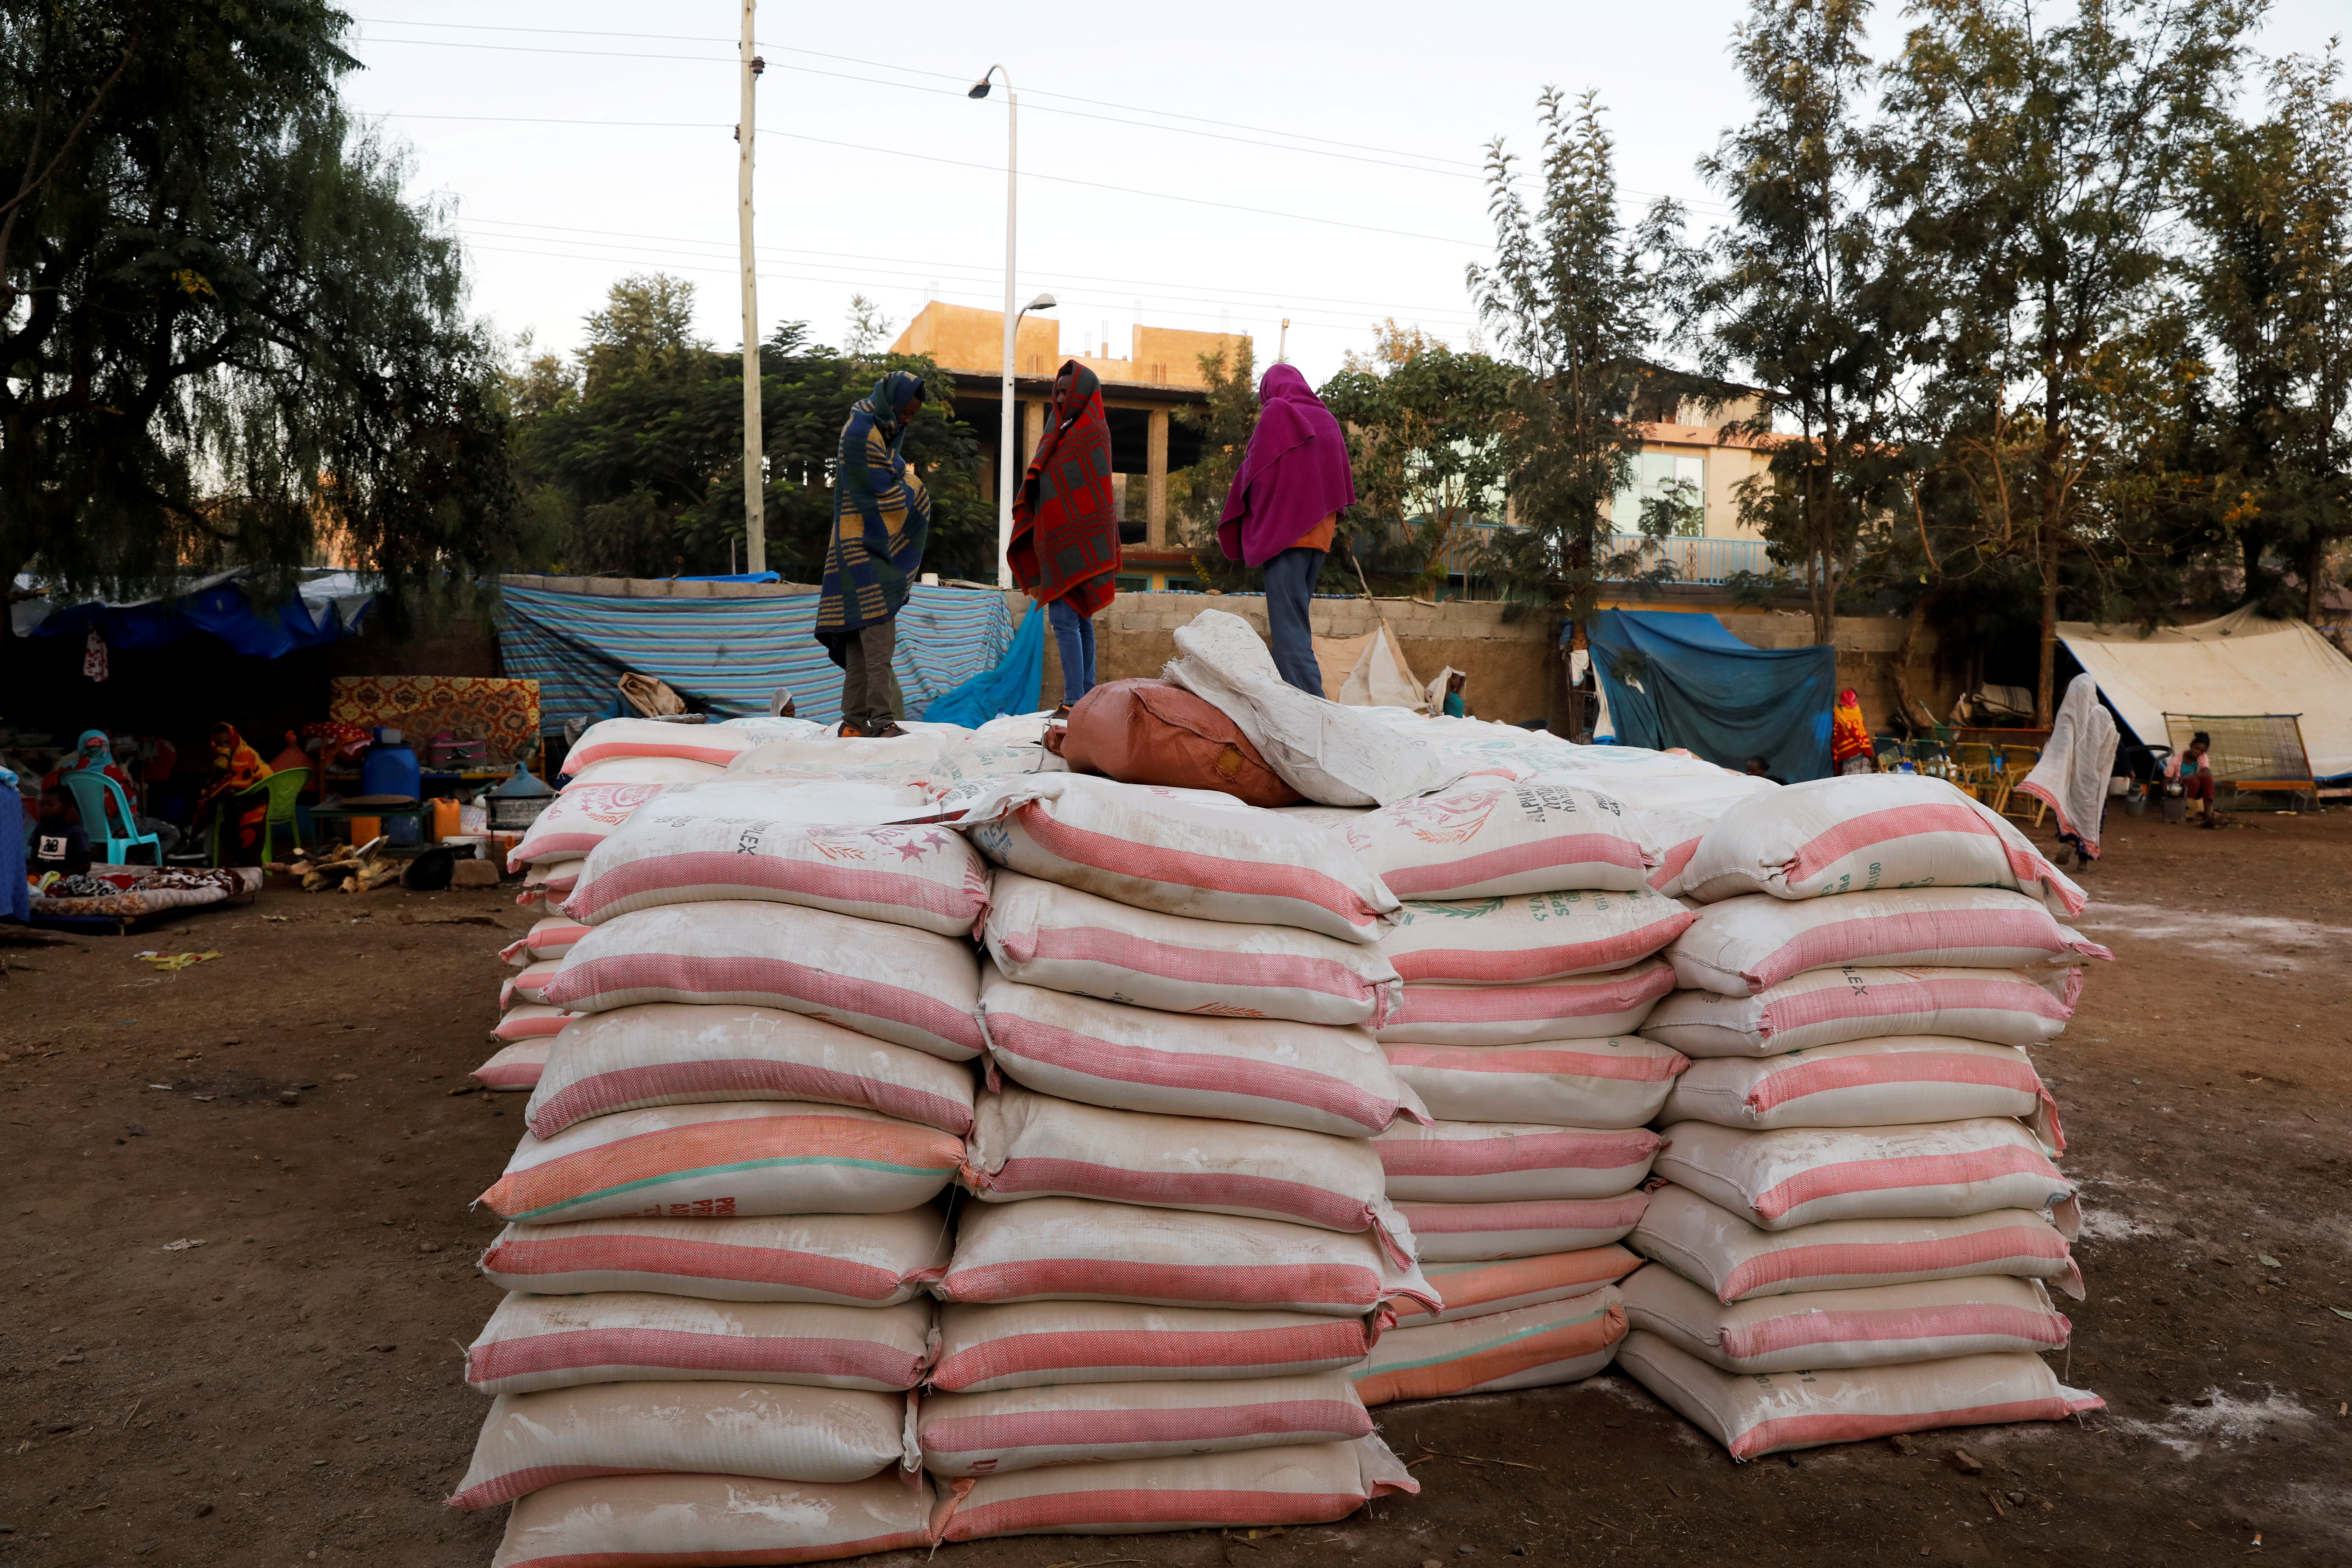 Bags of food donations are seen at the Tsehaye primary school in Shire